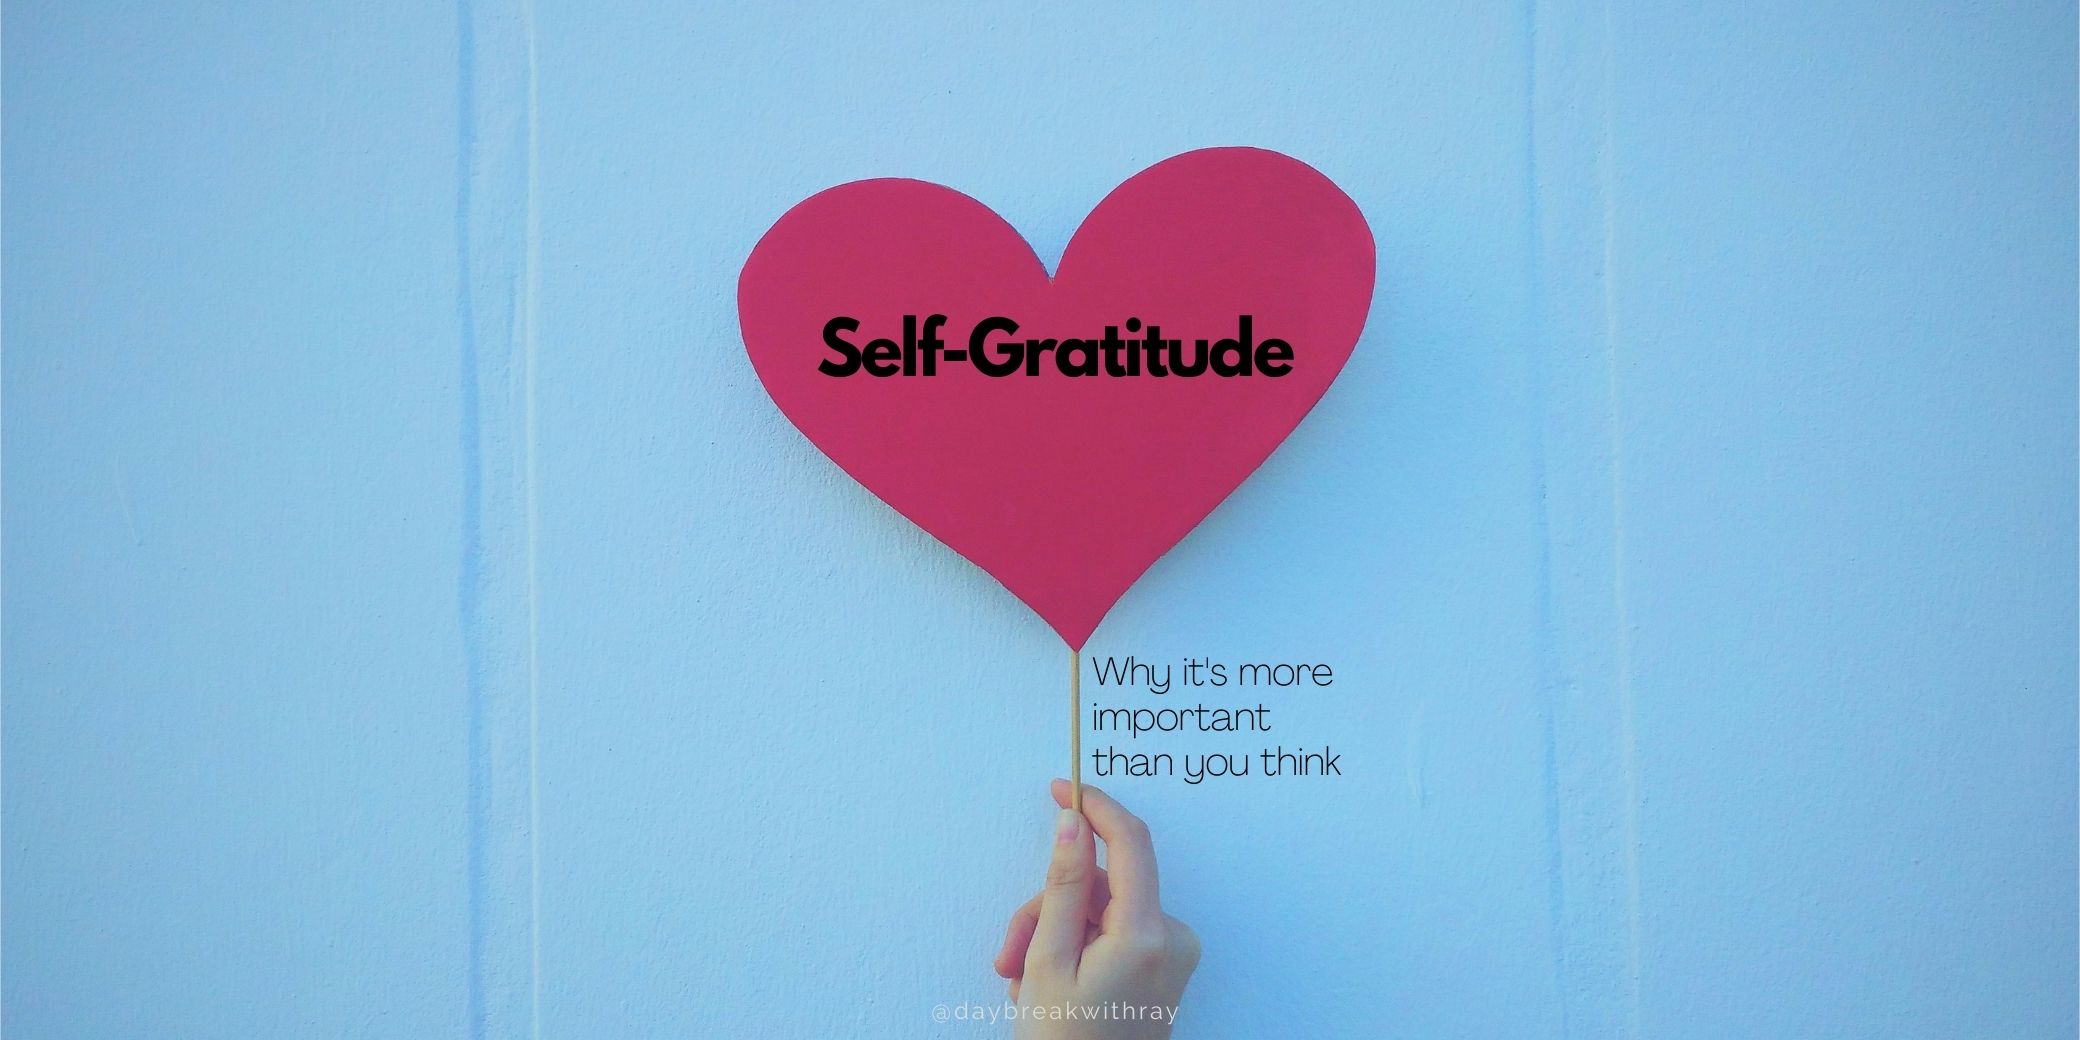 (Featured Image) Why Self-Gratitude is More Important Than You Think